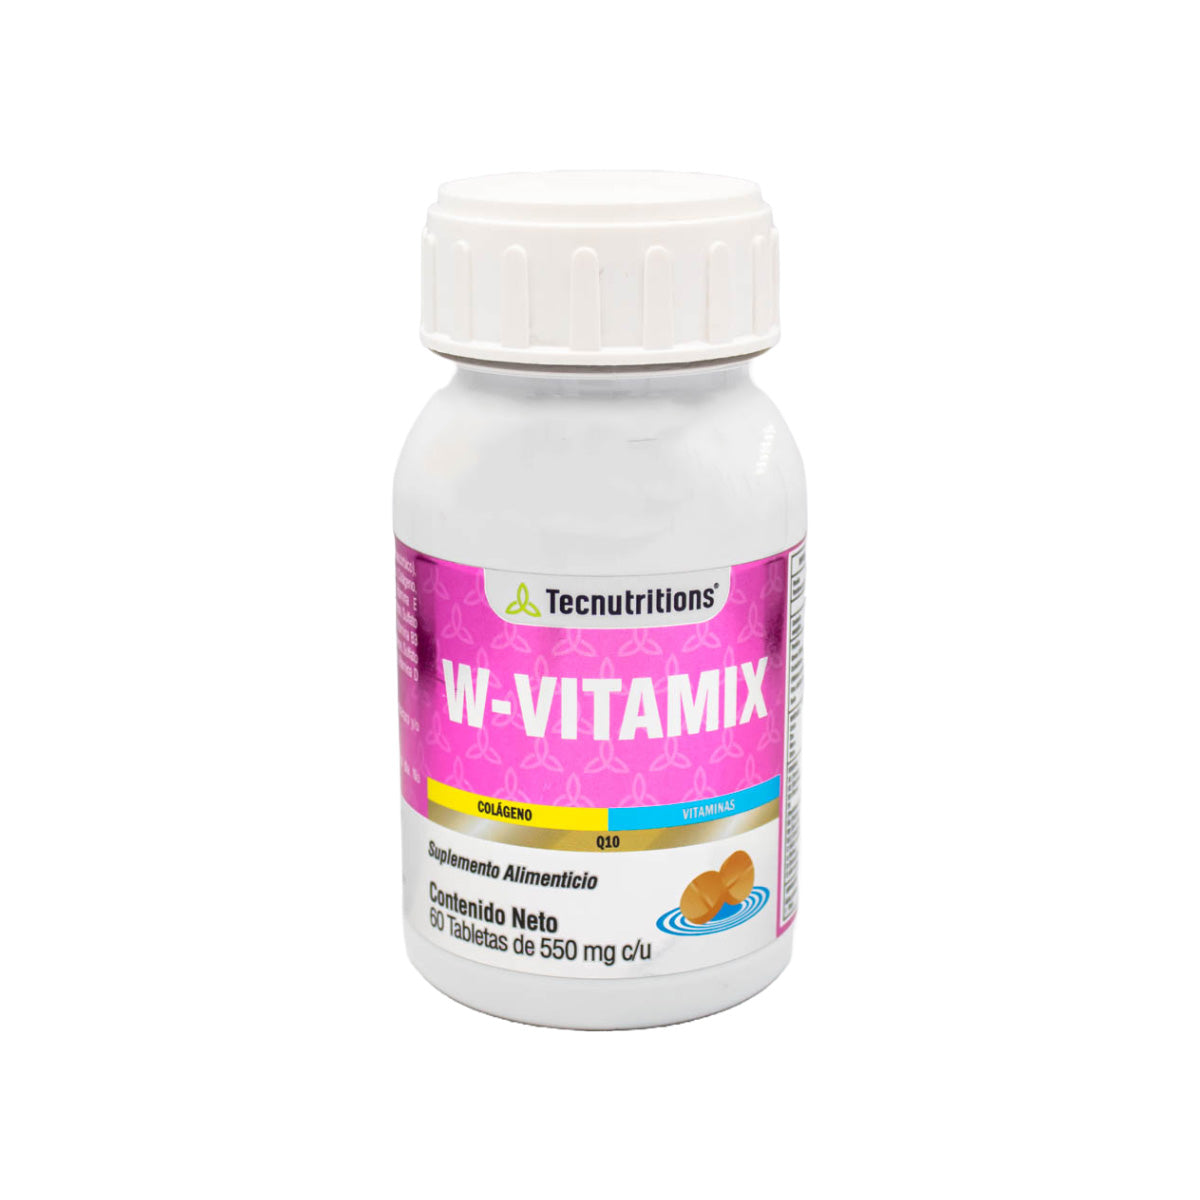 Multivitamin dietary supplement with amino acids, antioxidants and protein, W-Vitamix, 60 tabl